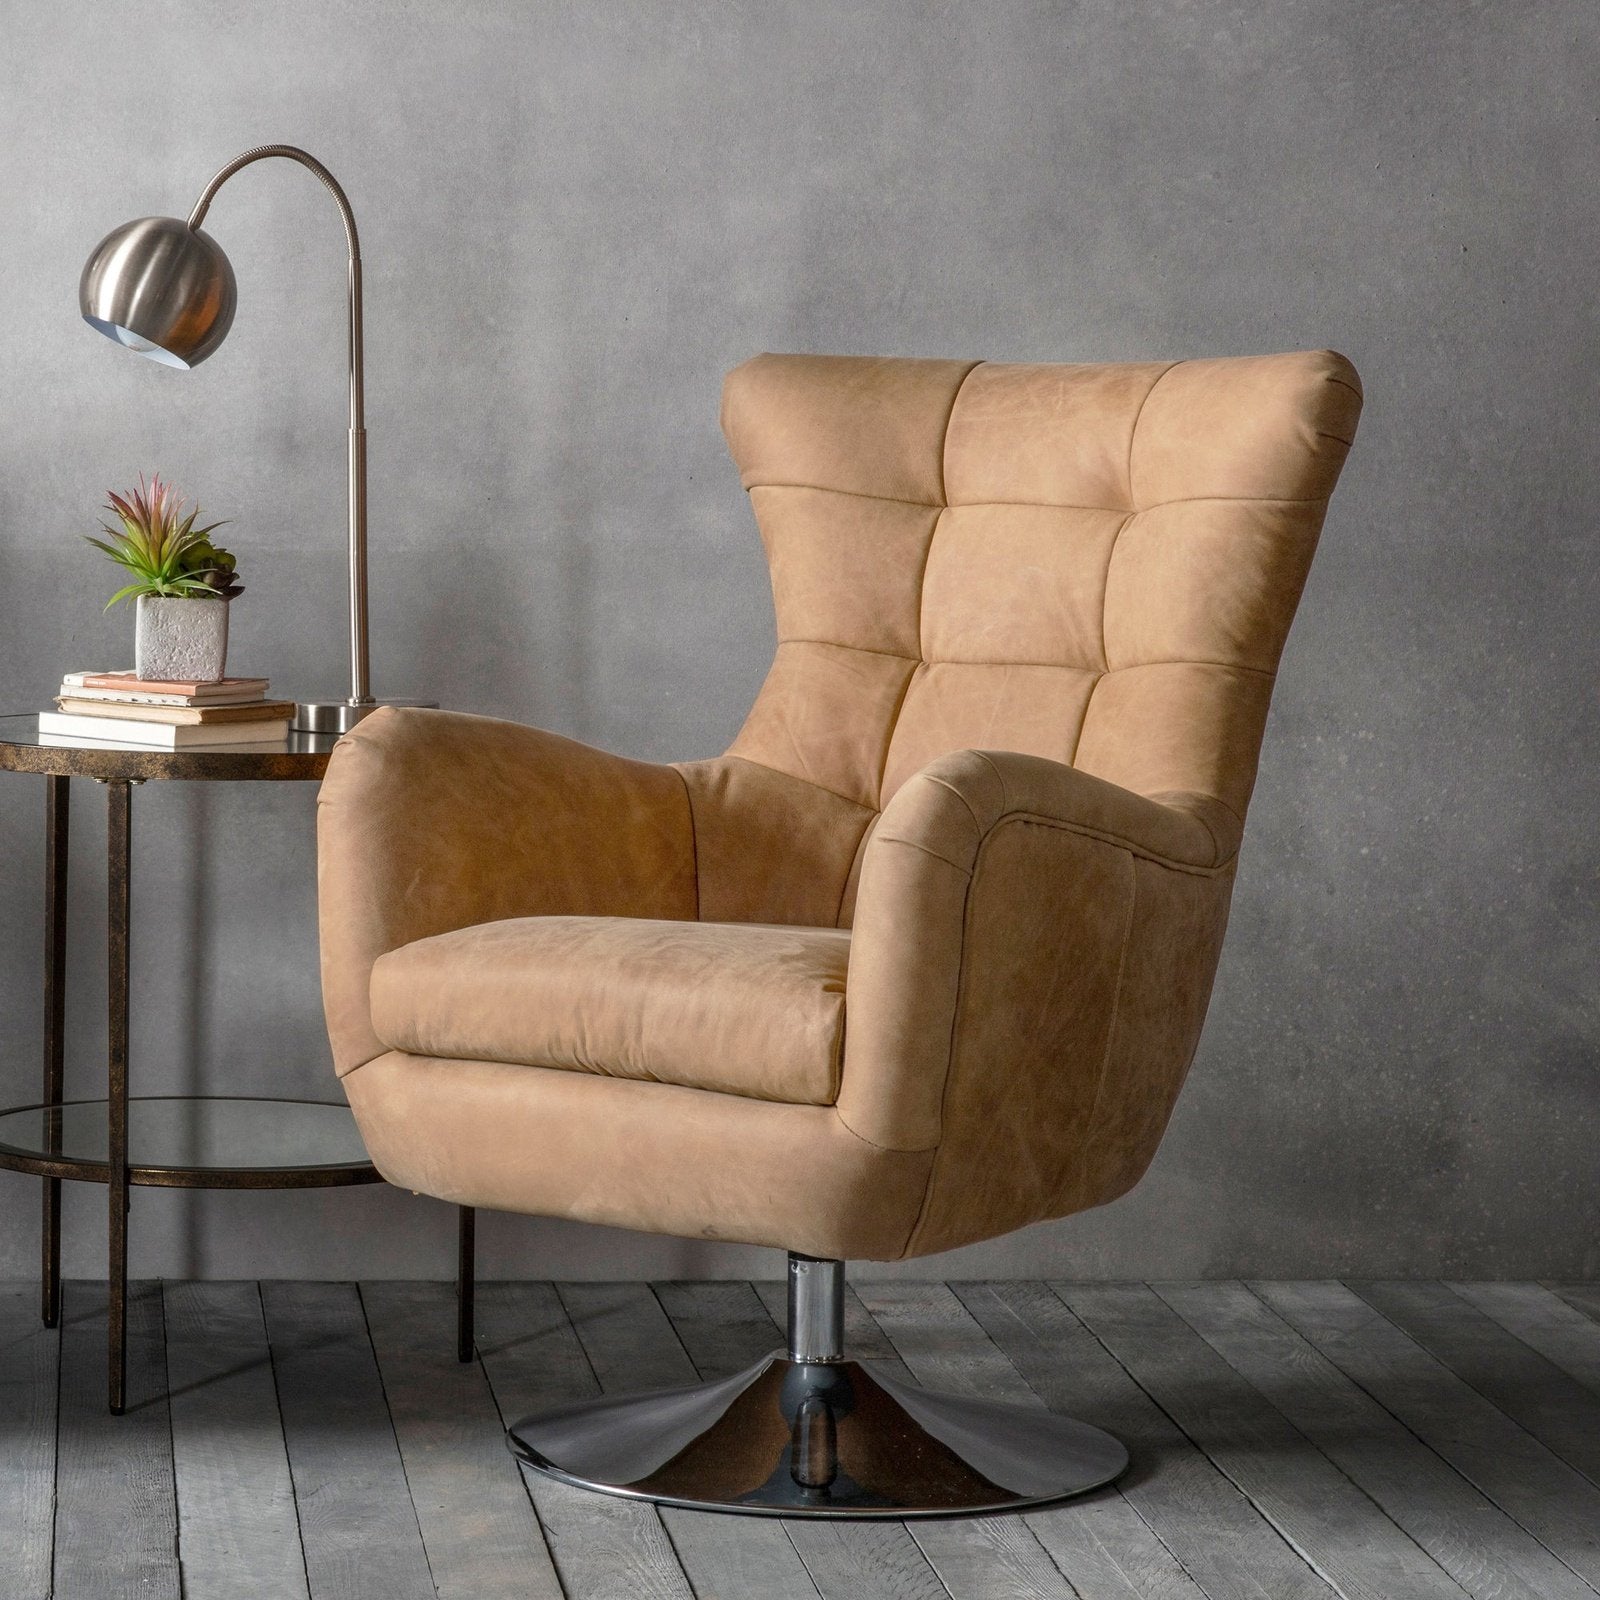 Hammersmith Leather Swivel Chair - Padded Seat - Pinch Pleated Back